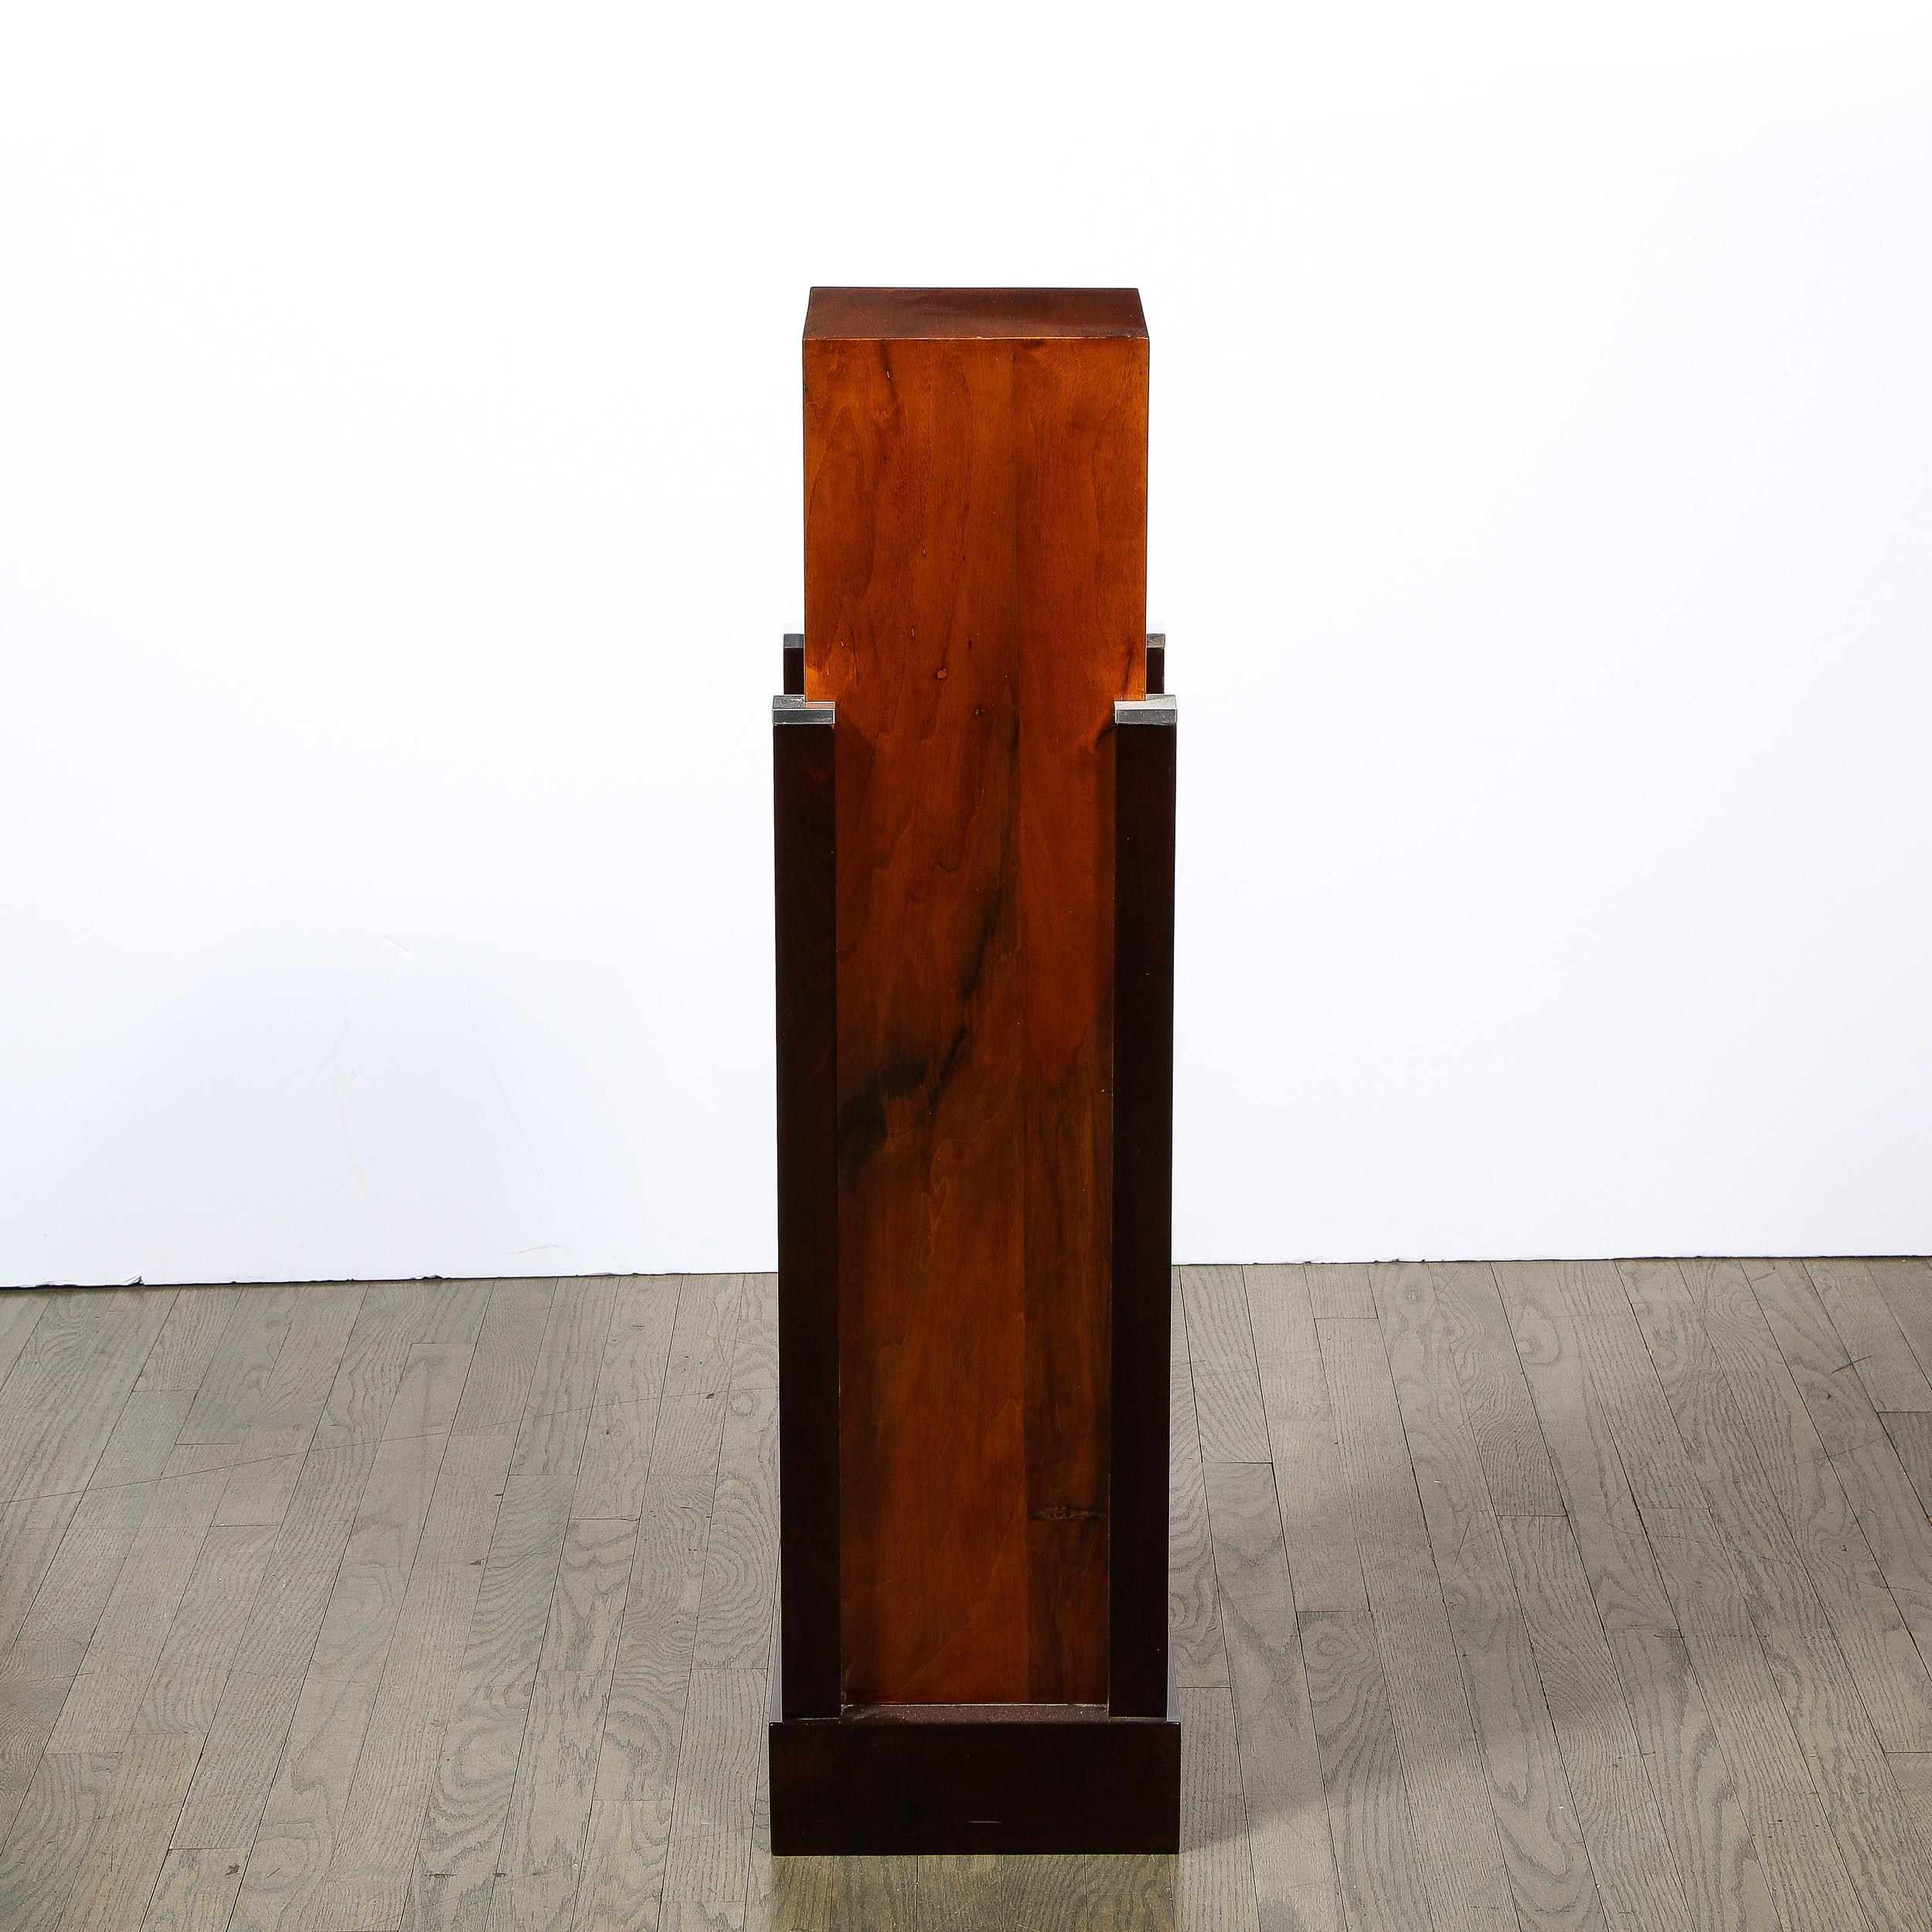 This stunning Art Deco Machine Age skyscraper style pedestal was realized in France circa 1935. It offers a black lacquer rectilinear base that surrounds the volumetric rectangular body of the pedestal composed of bookmatched walnut that exhibits a